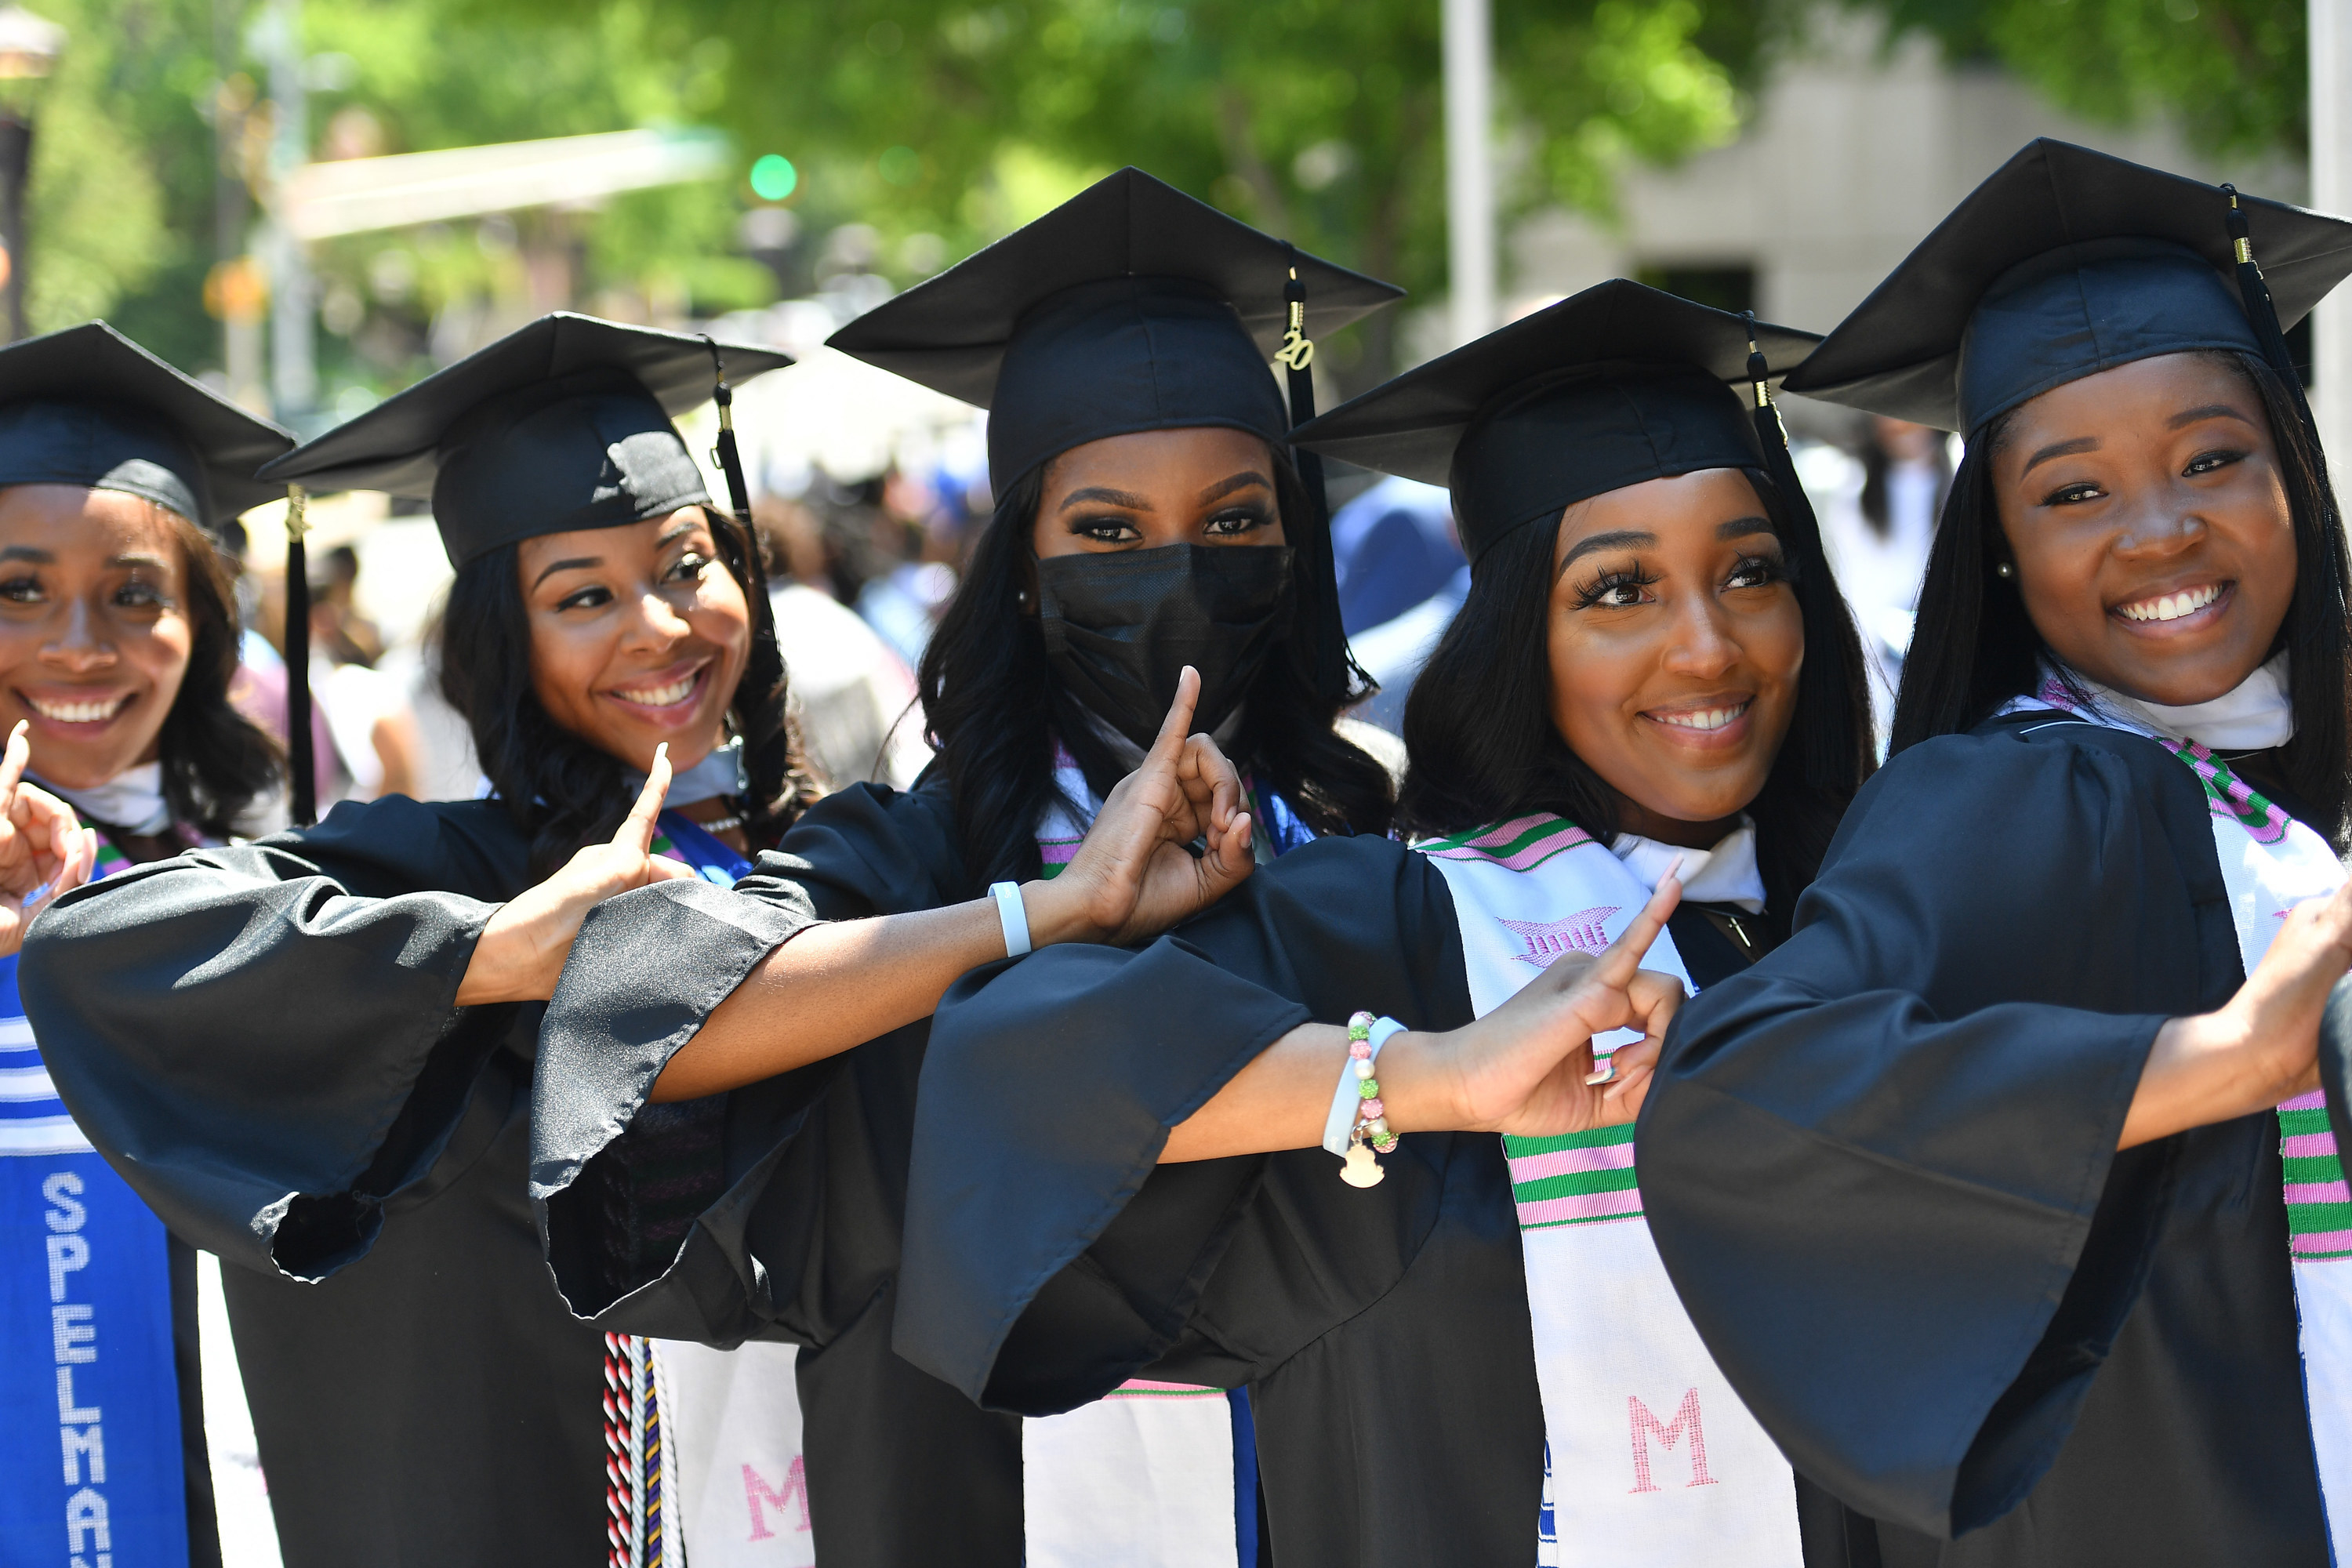 a group of women on their graduation day posing together